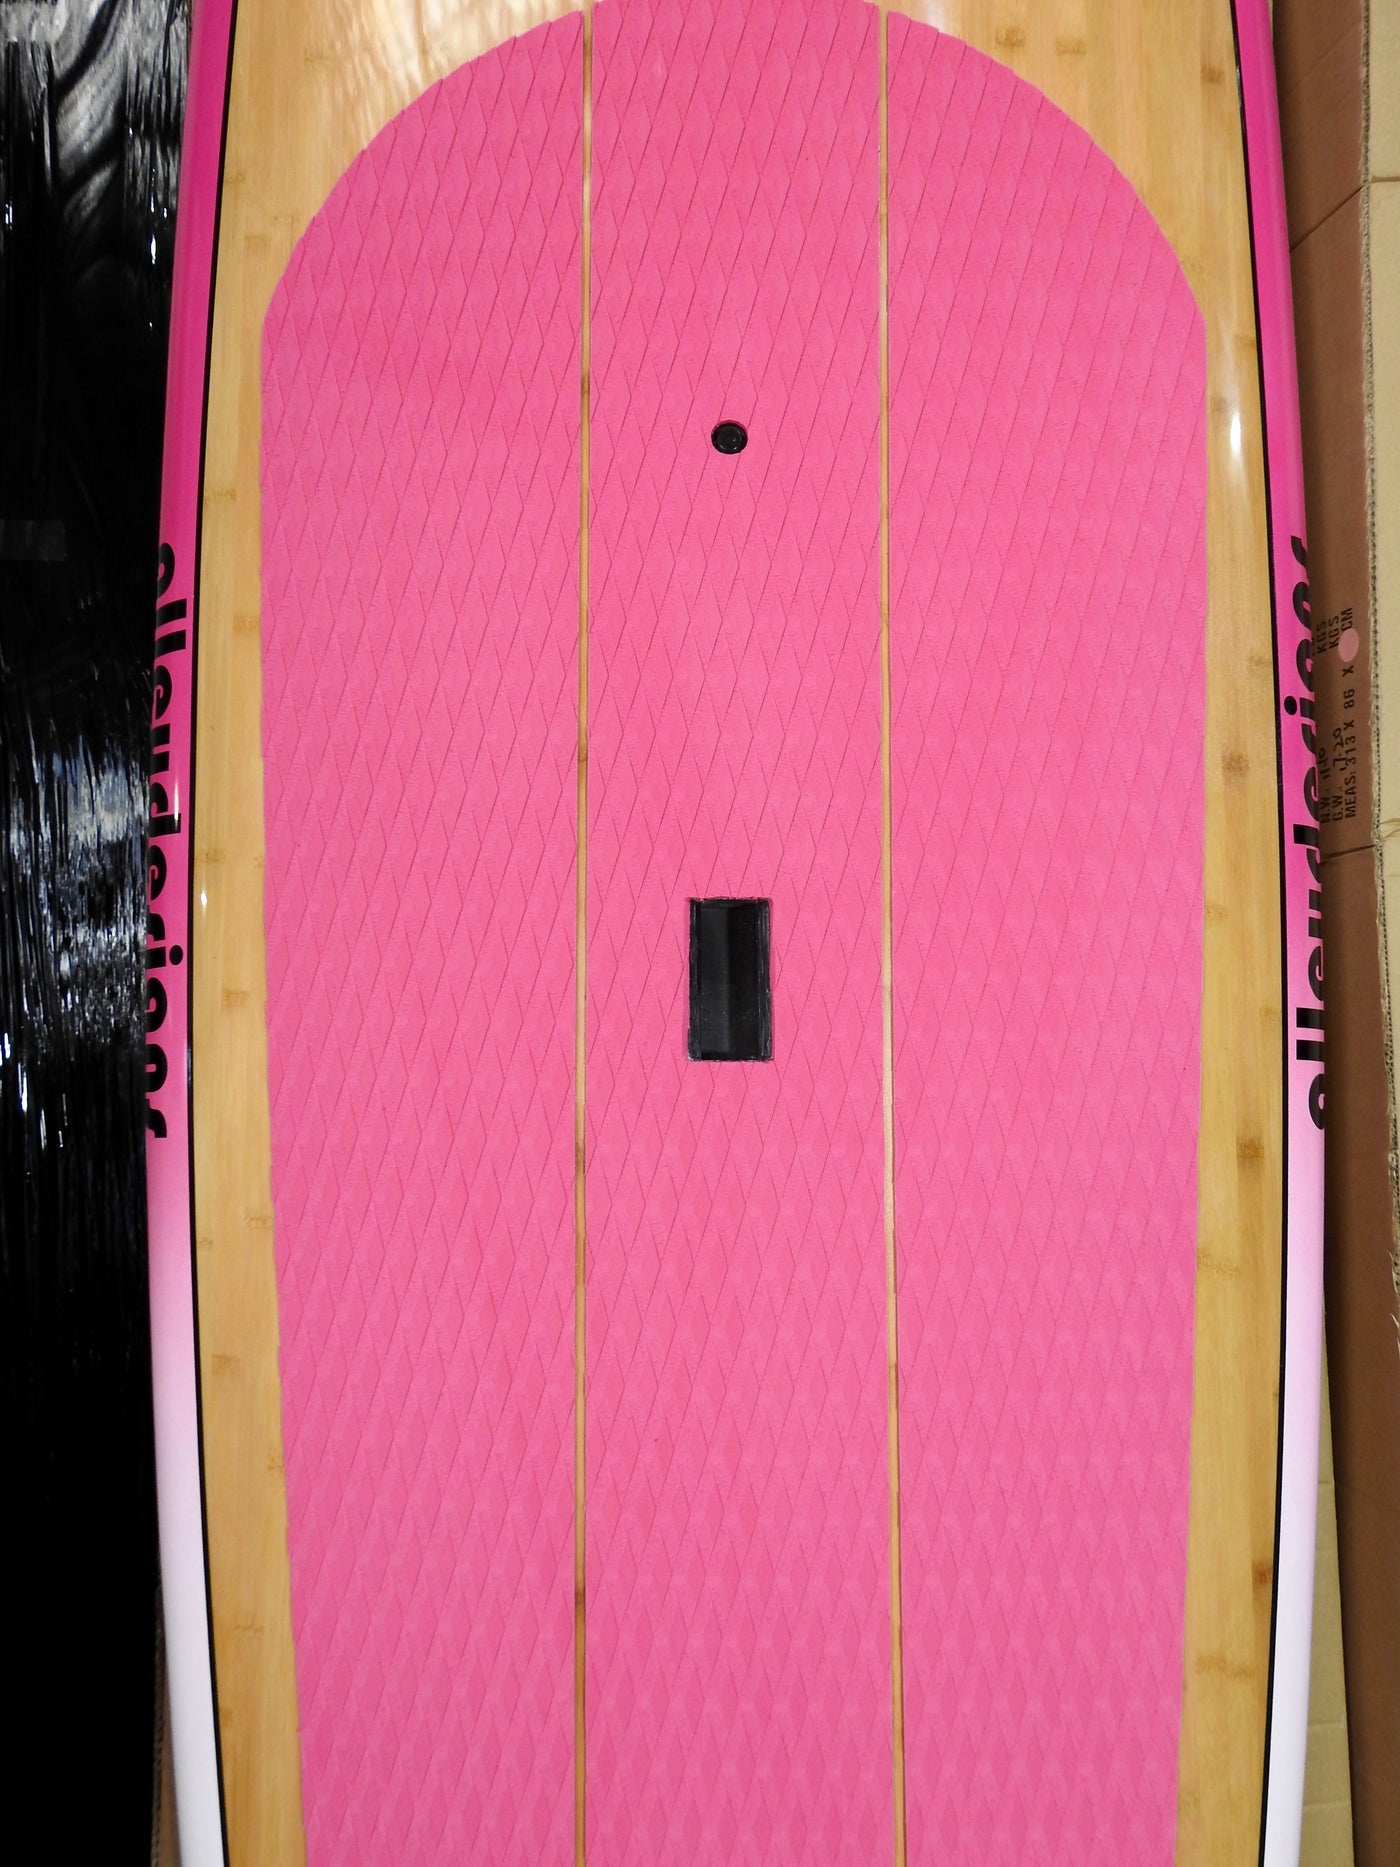 10' x 32" Bamboo Performance Pink Fade Alleydesigns SUP 9KG - Alleydesigns  Pty Ltd                                             ABN: 44165571264